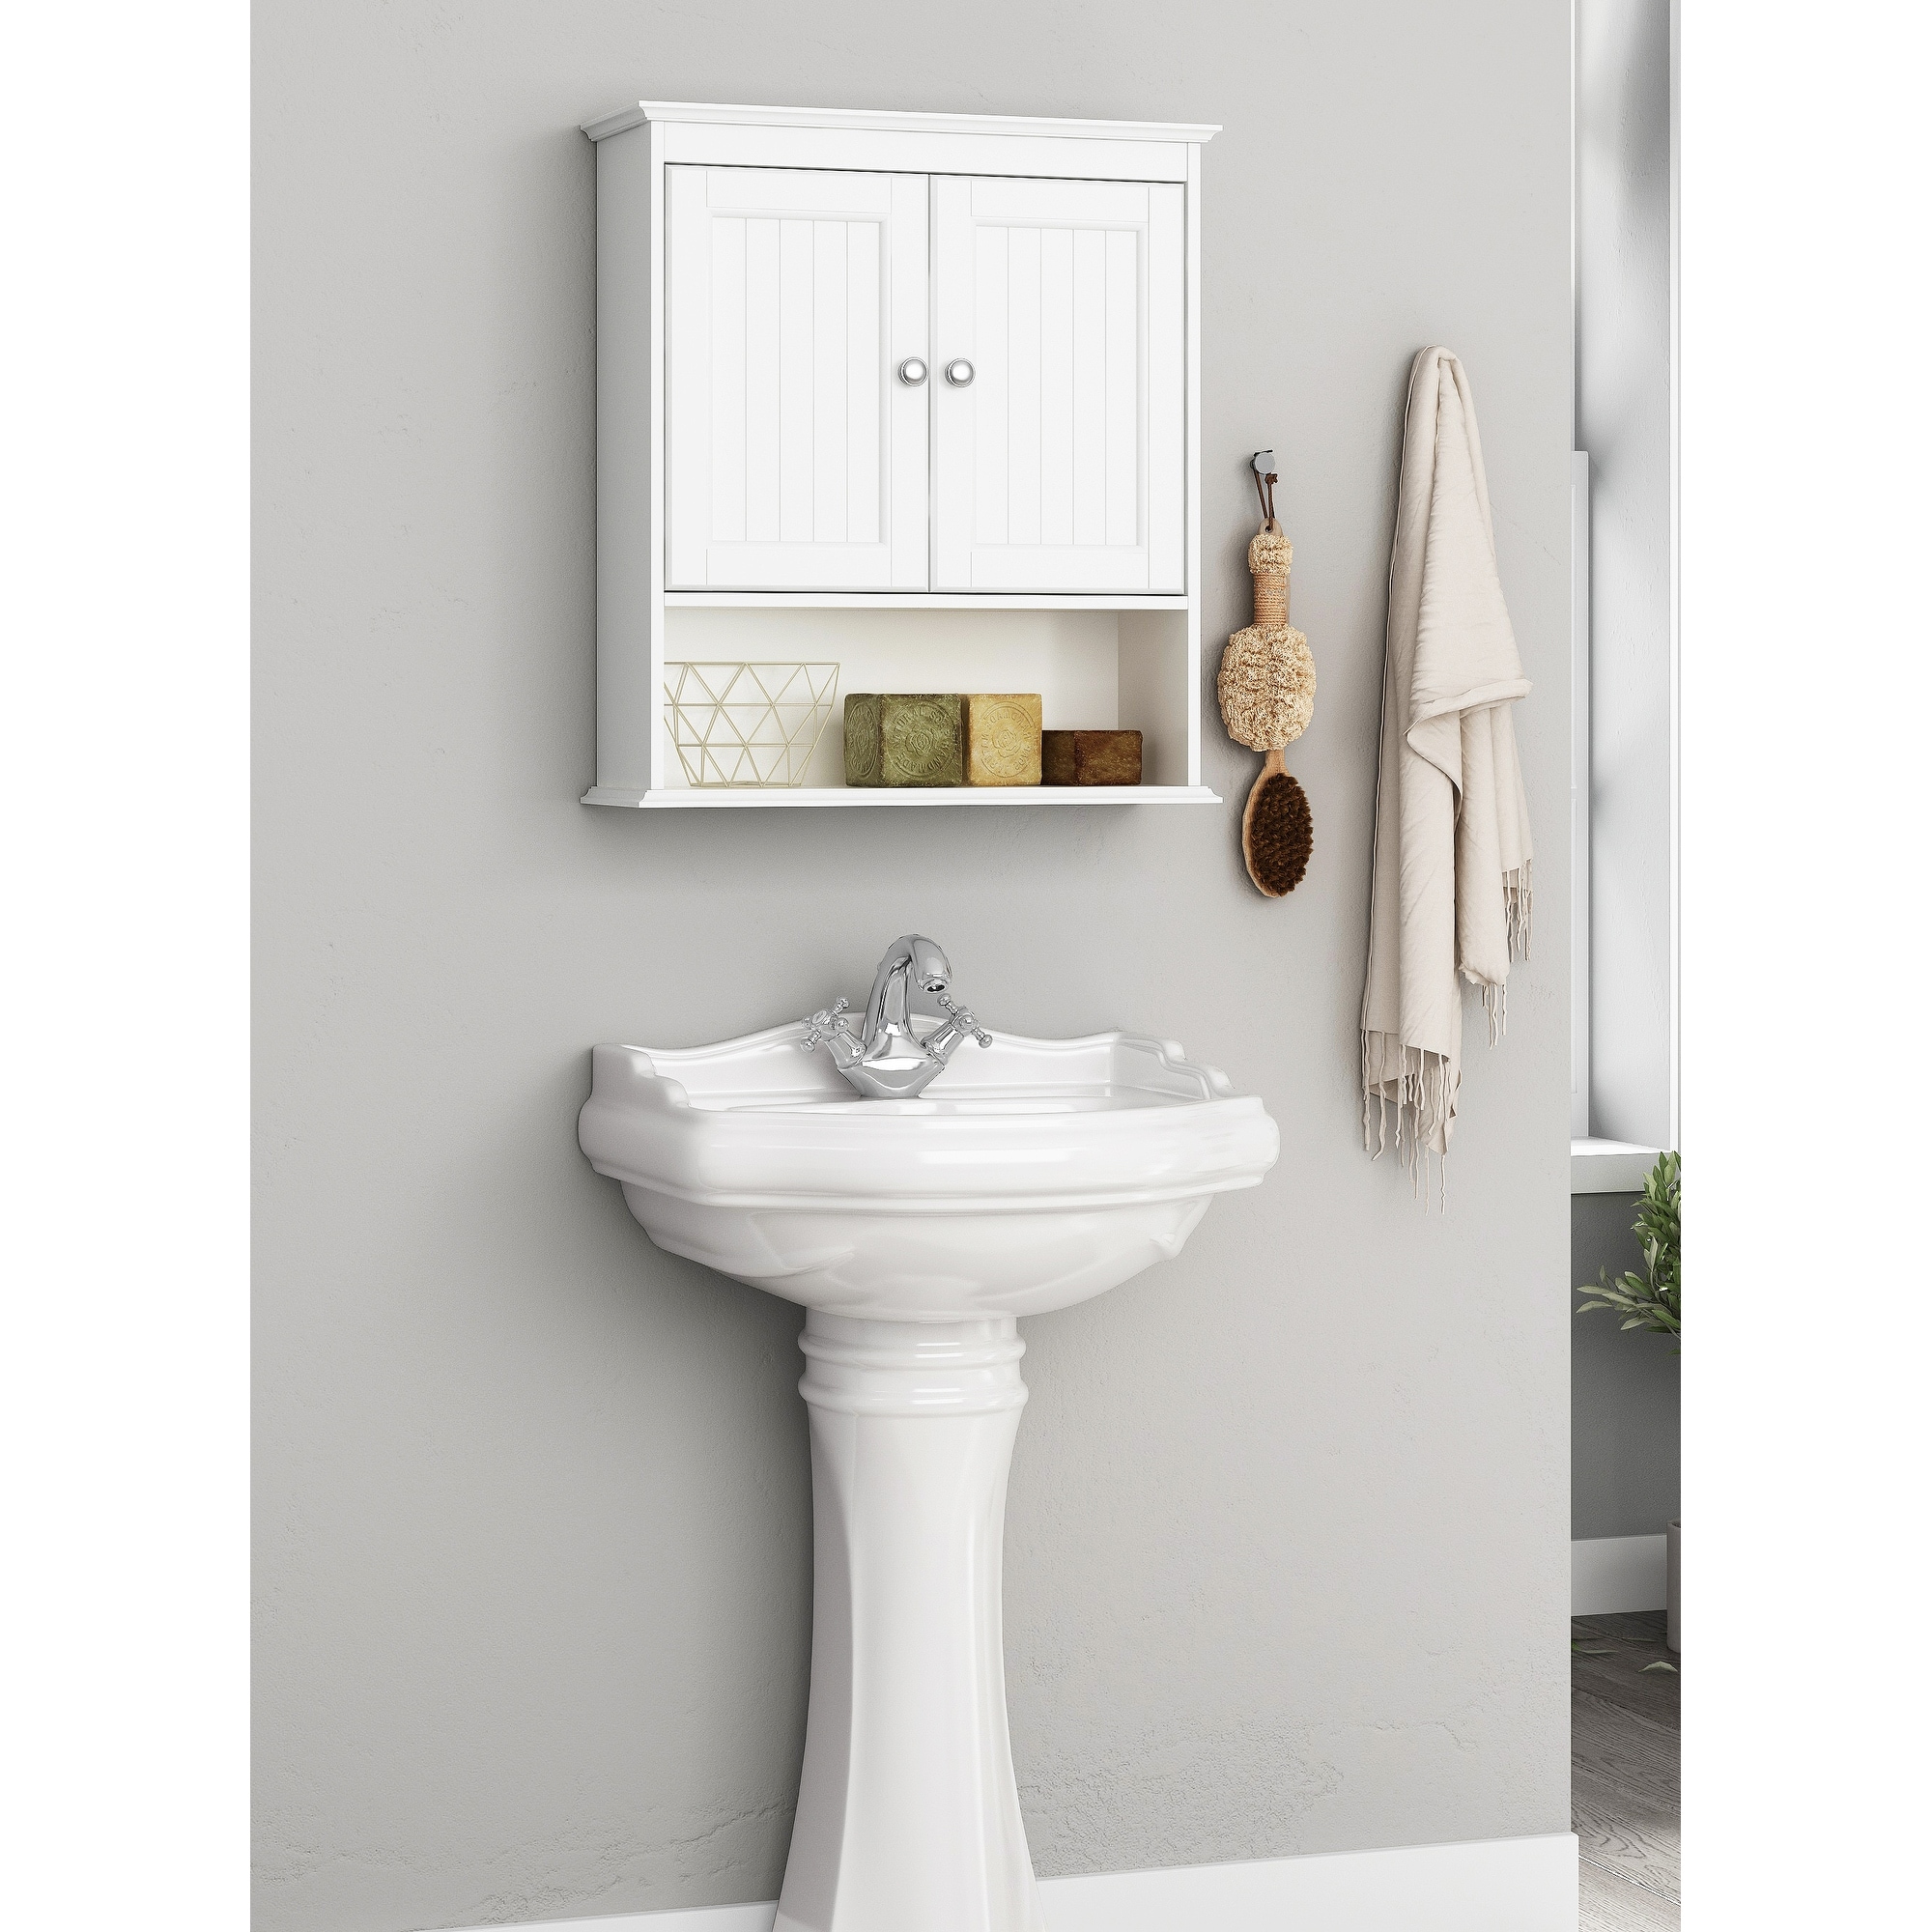 https://ak1.ostkcdn.com/images/products/is/images/direct/83336836341c1cee70935baad6589b7eff59f860/Spirich-Home-Bathroom-Two-Doo-Wall-Cabinet%2C-Wood-Hanging-Cabinet%2C-Wall-Cabinets-with-Doors-and-Shelves-Over-The-Toilet%2C-White.jpg